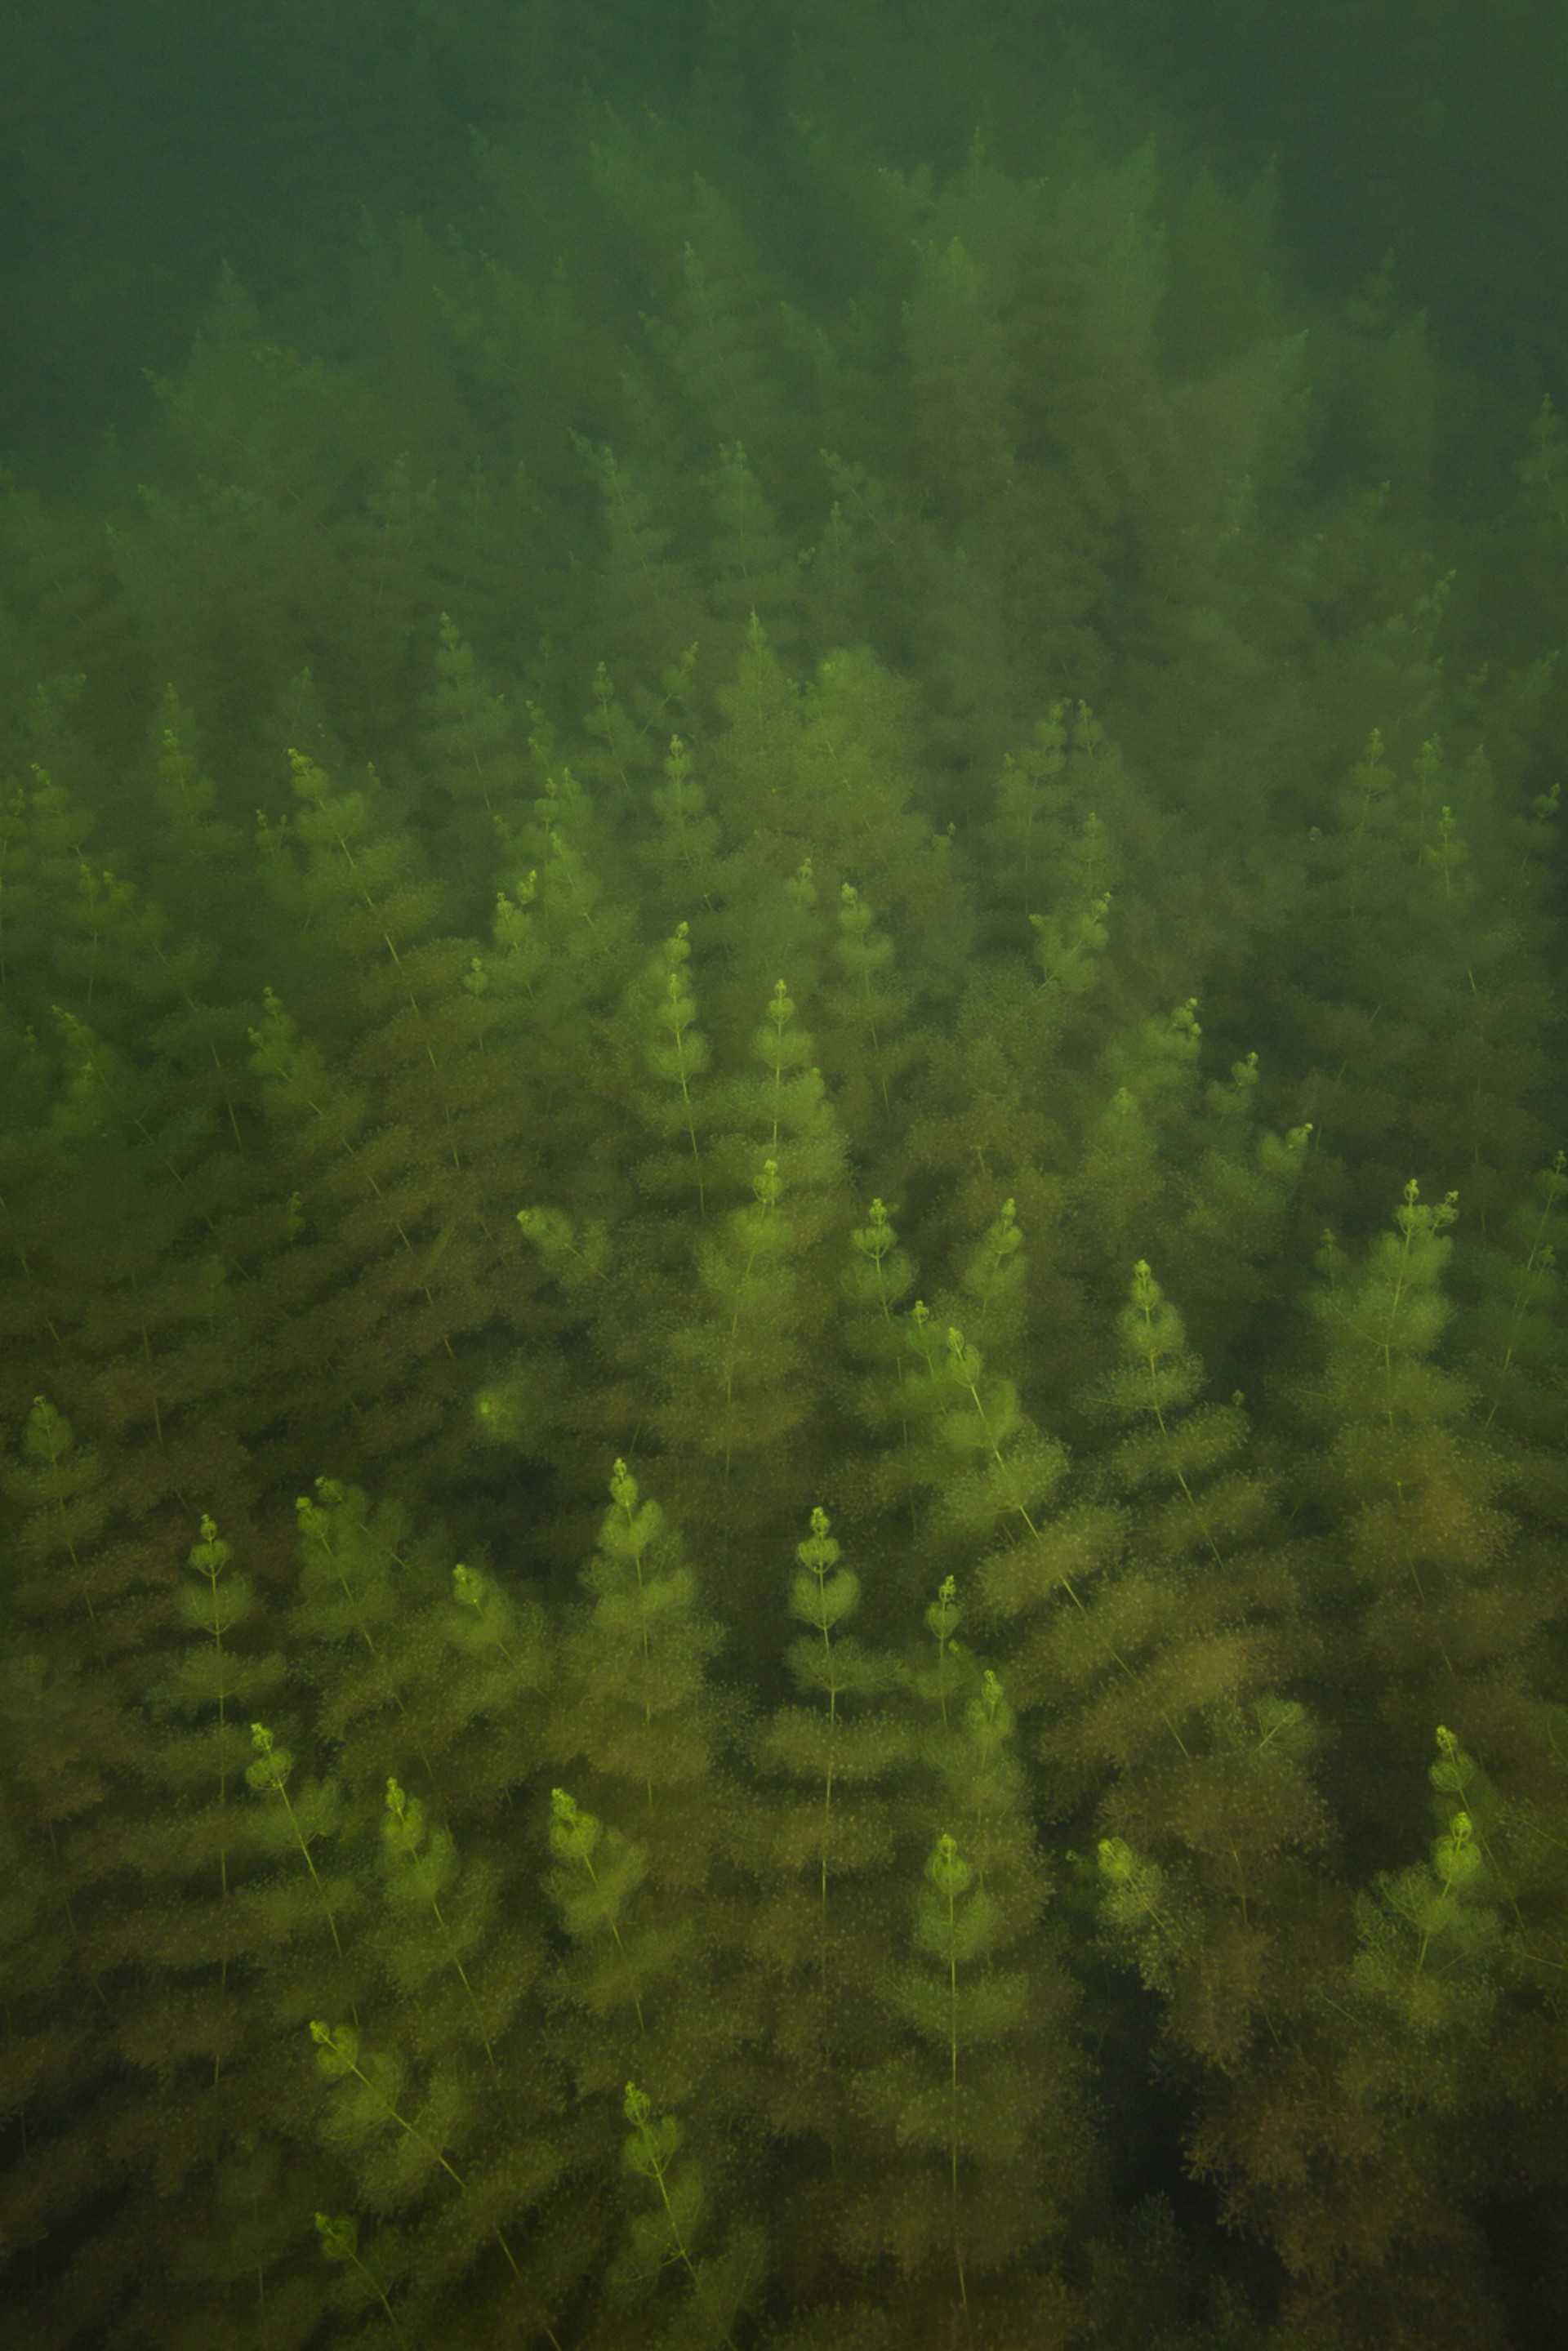 WATER SERIES: HORNWORT STUDY NO 3 by WILLIAM SCULLY